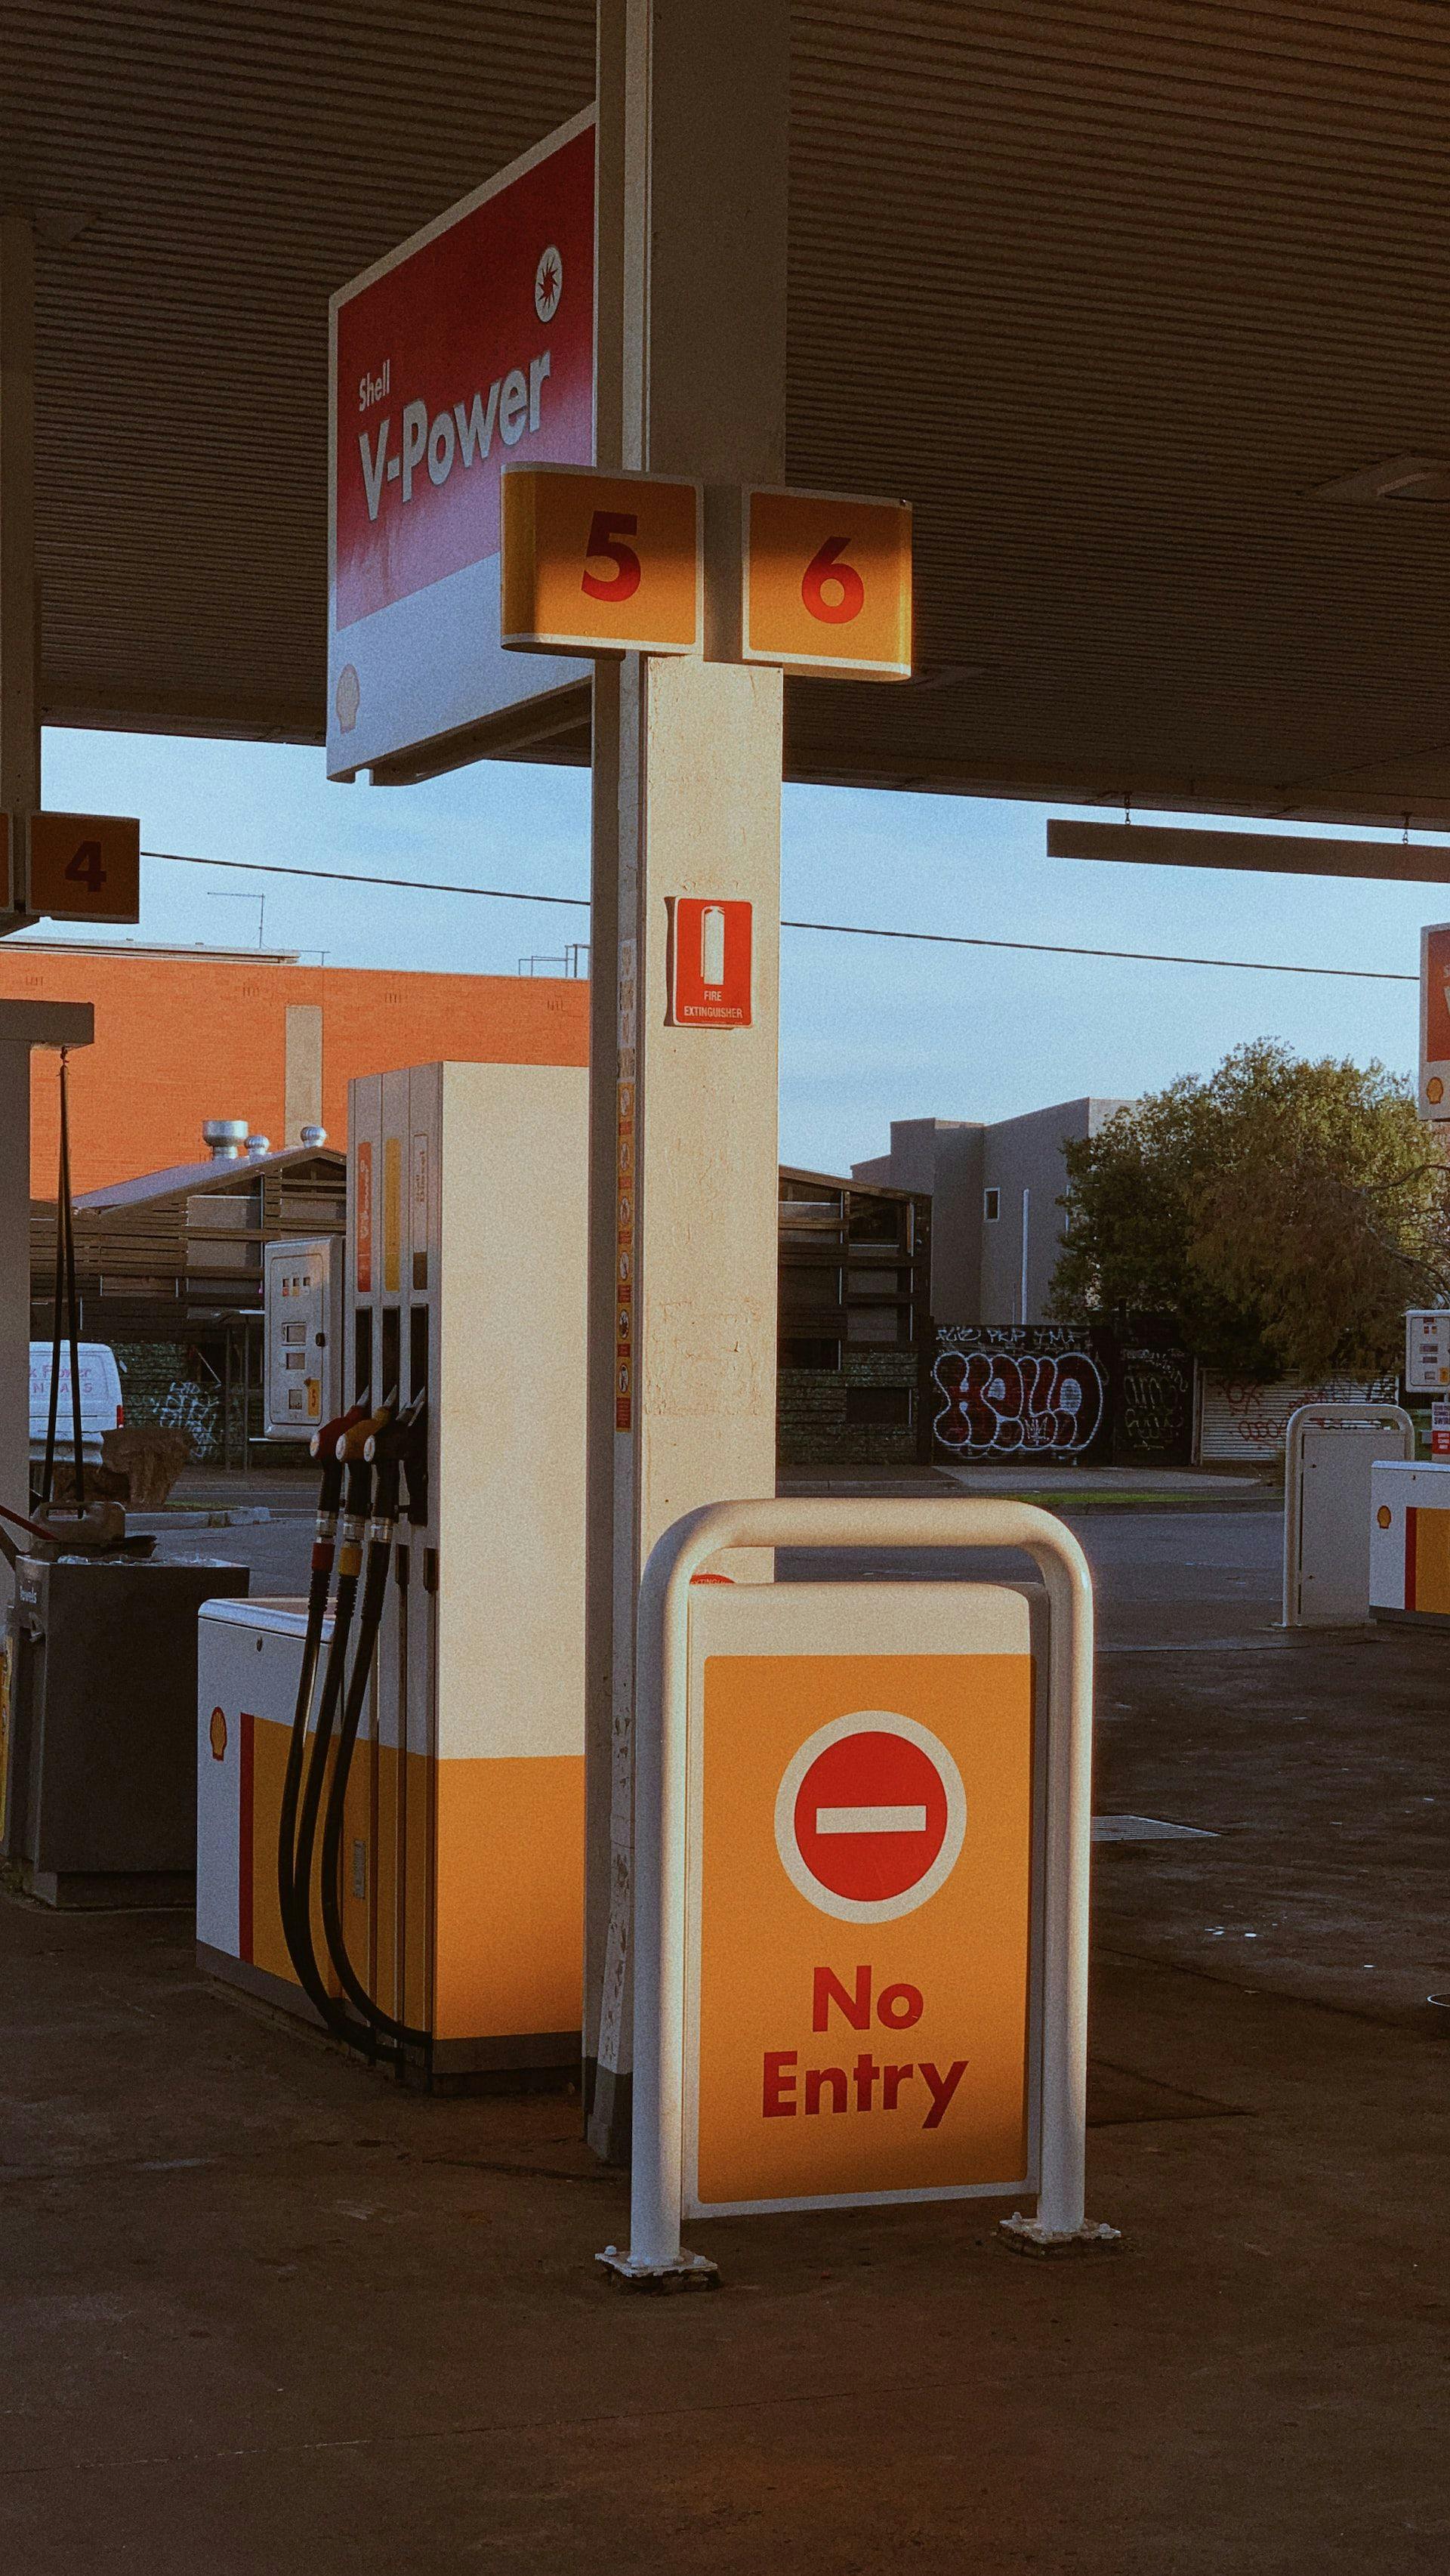 French border gas stations run out of petrol on weekend. Luxembourg to blame?